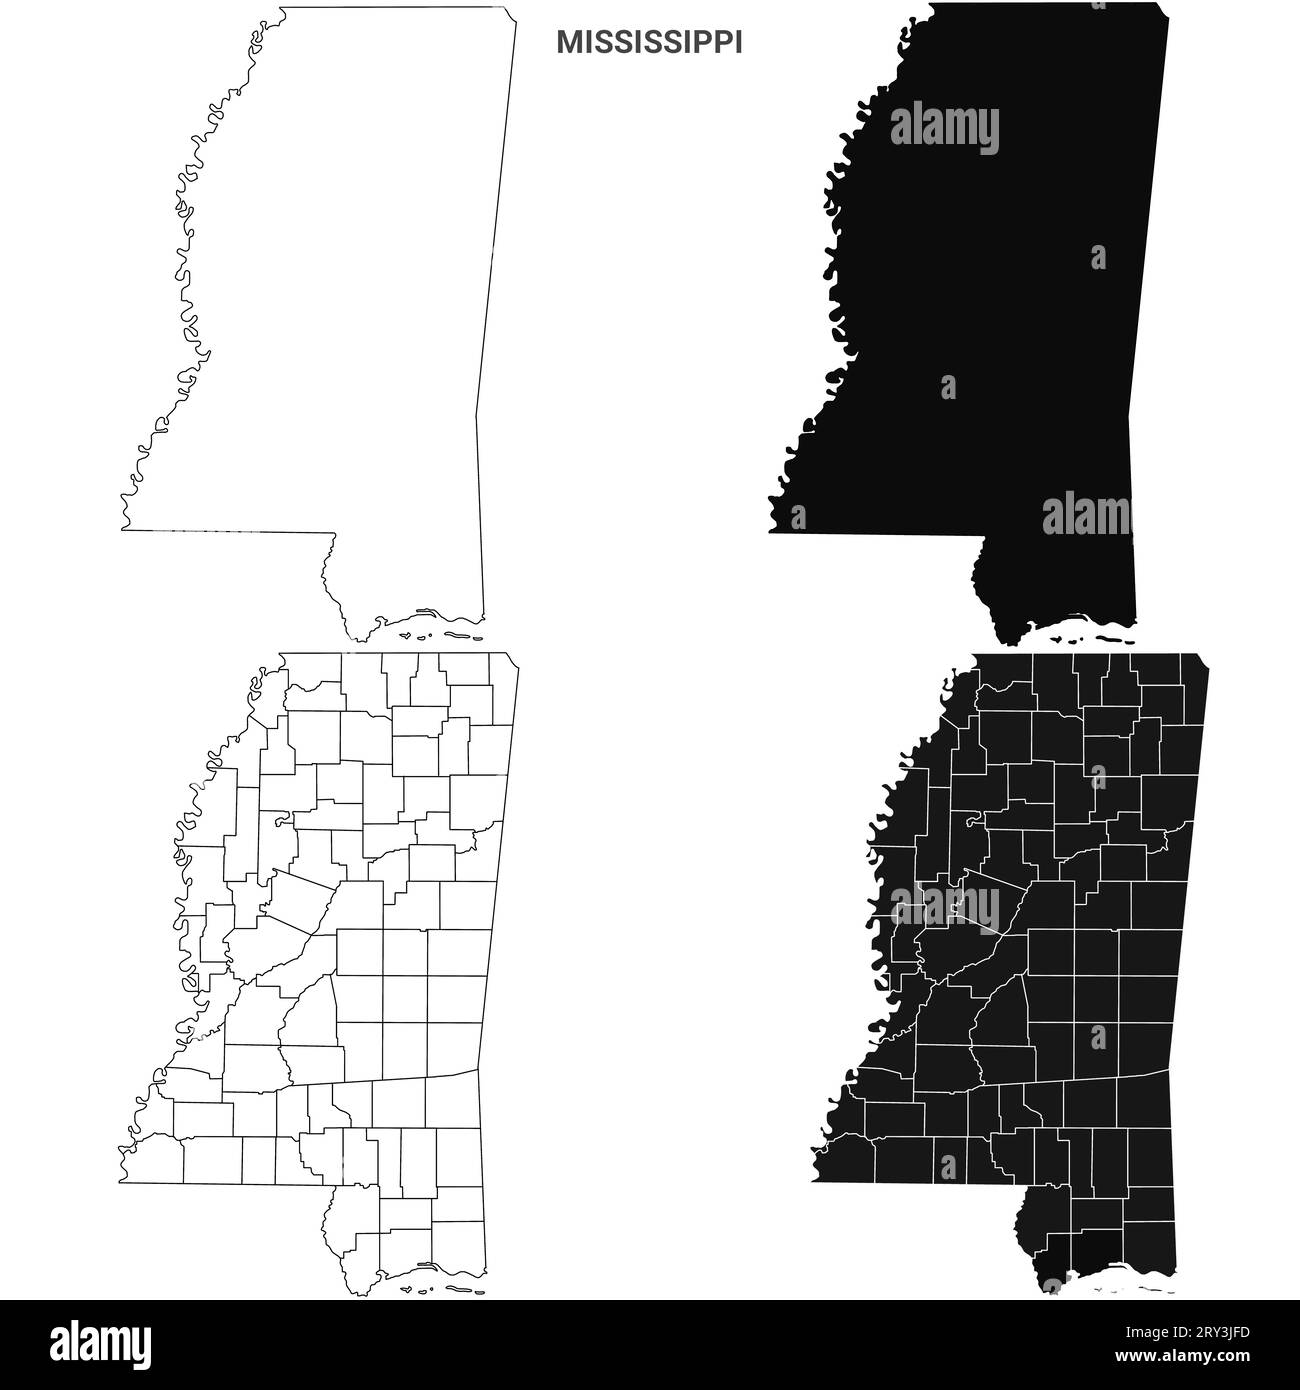 Mississippi counties outline map set - illustration version Stock Photo